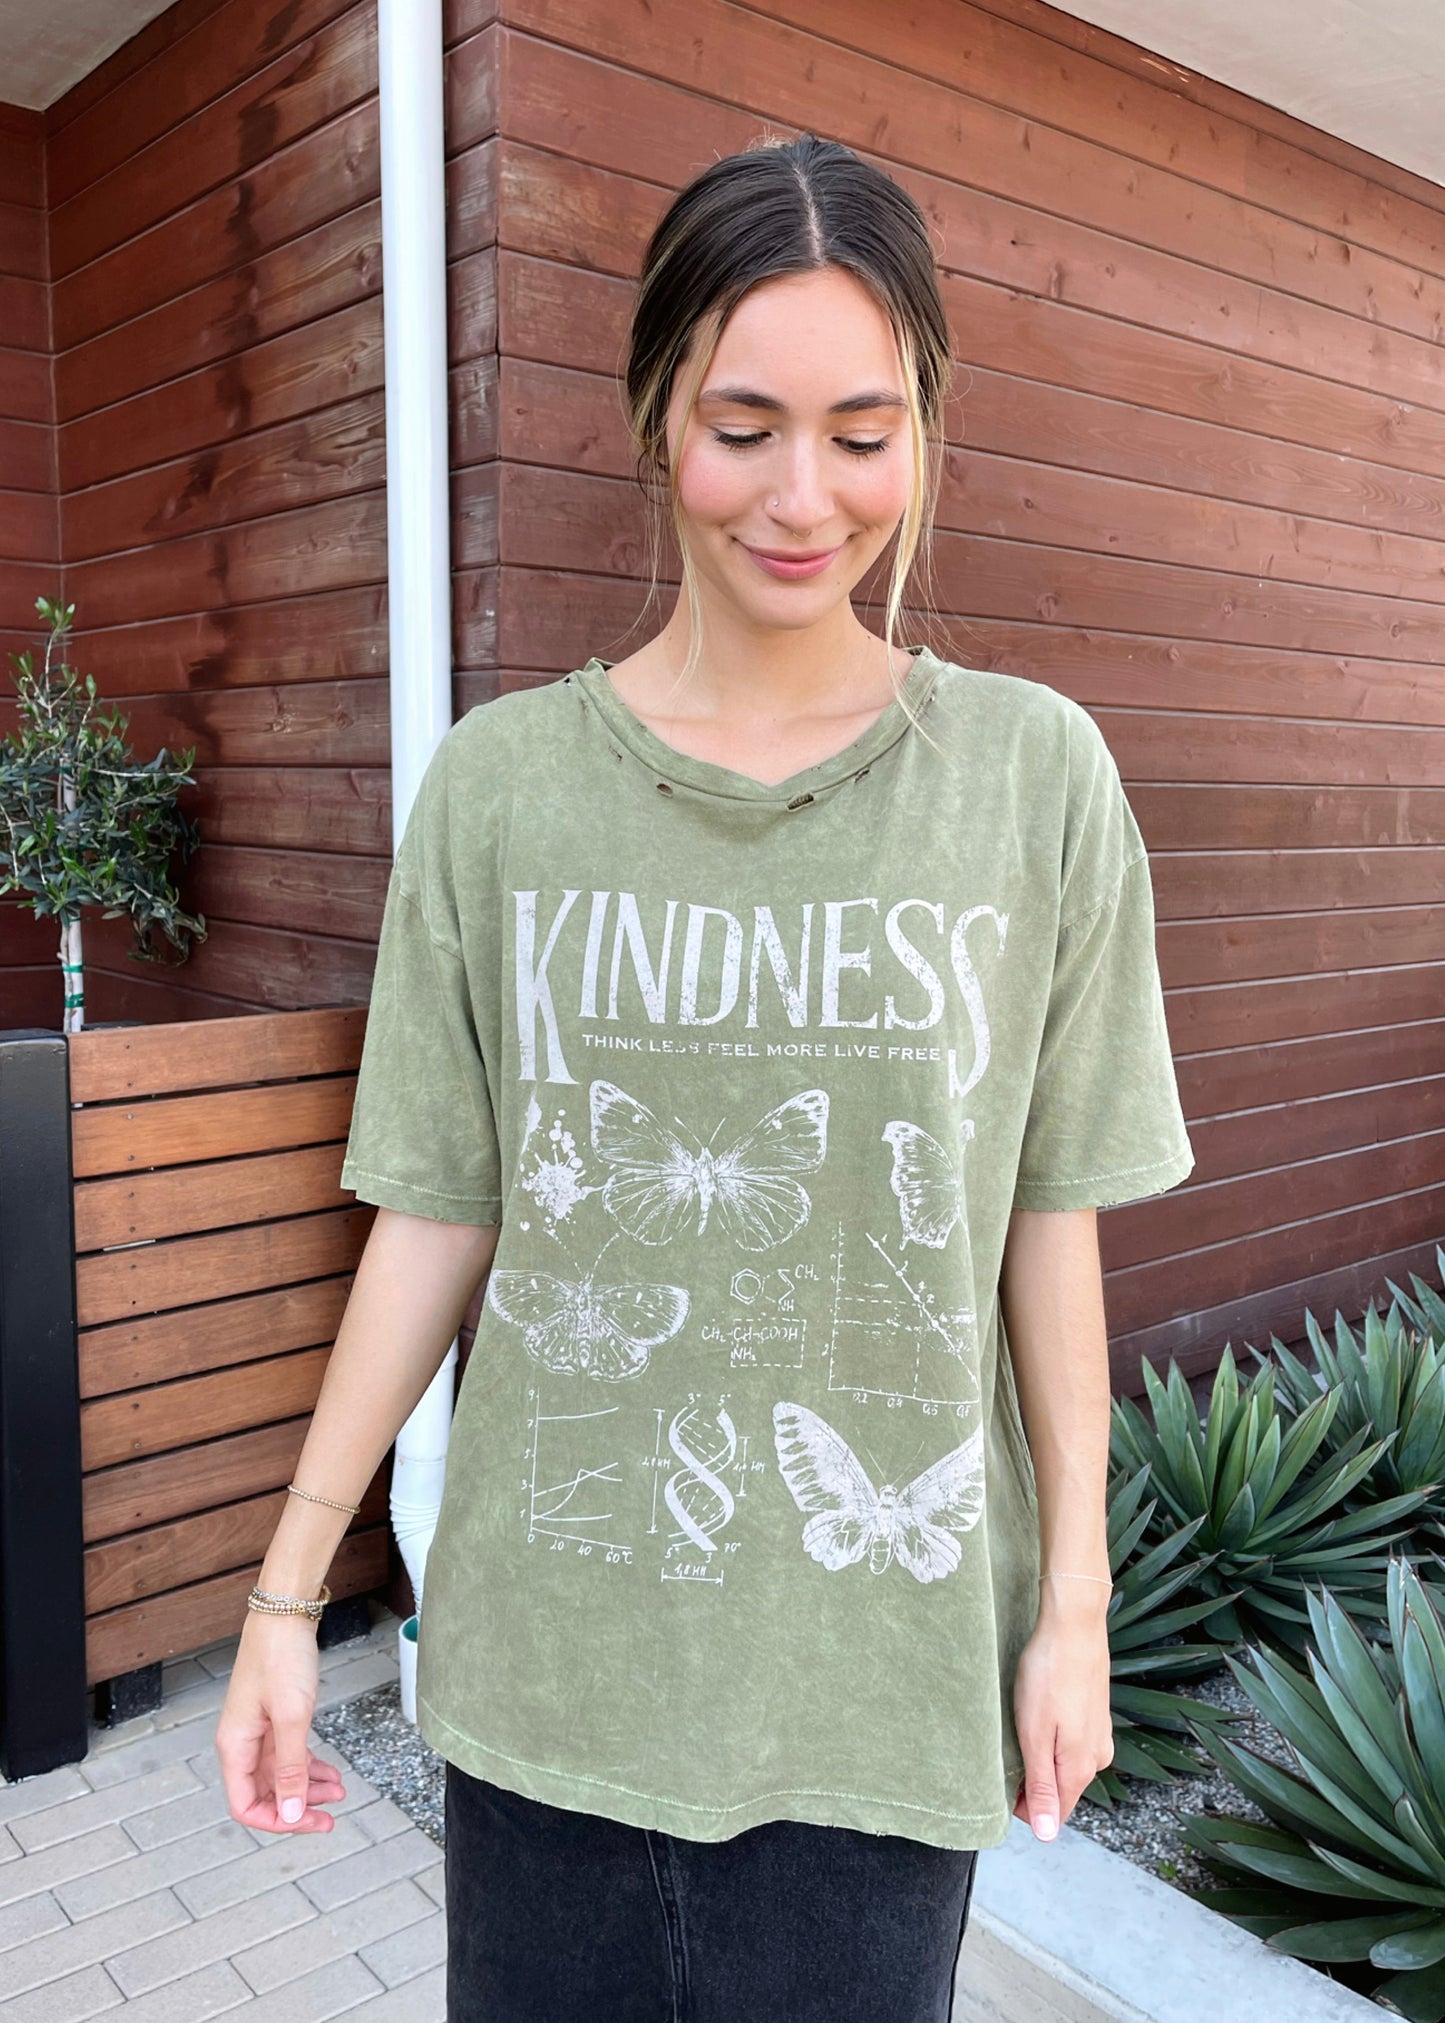 "Kindness" Graphic Tee